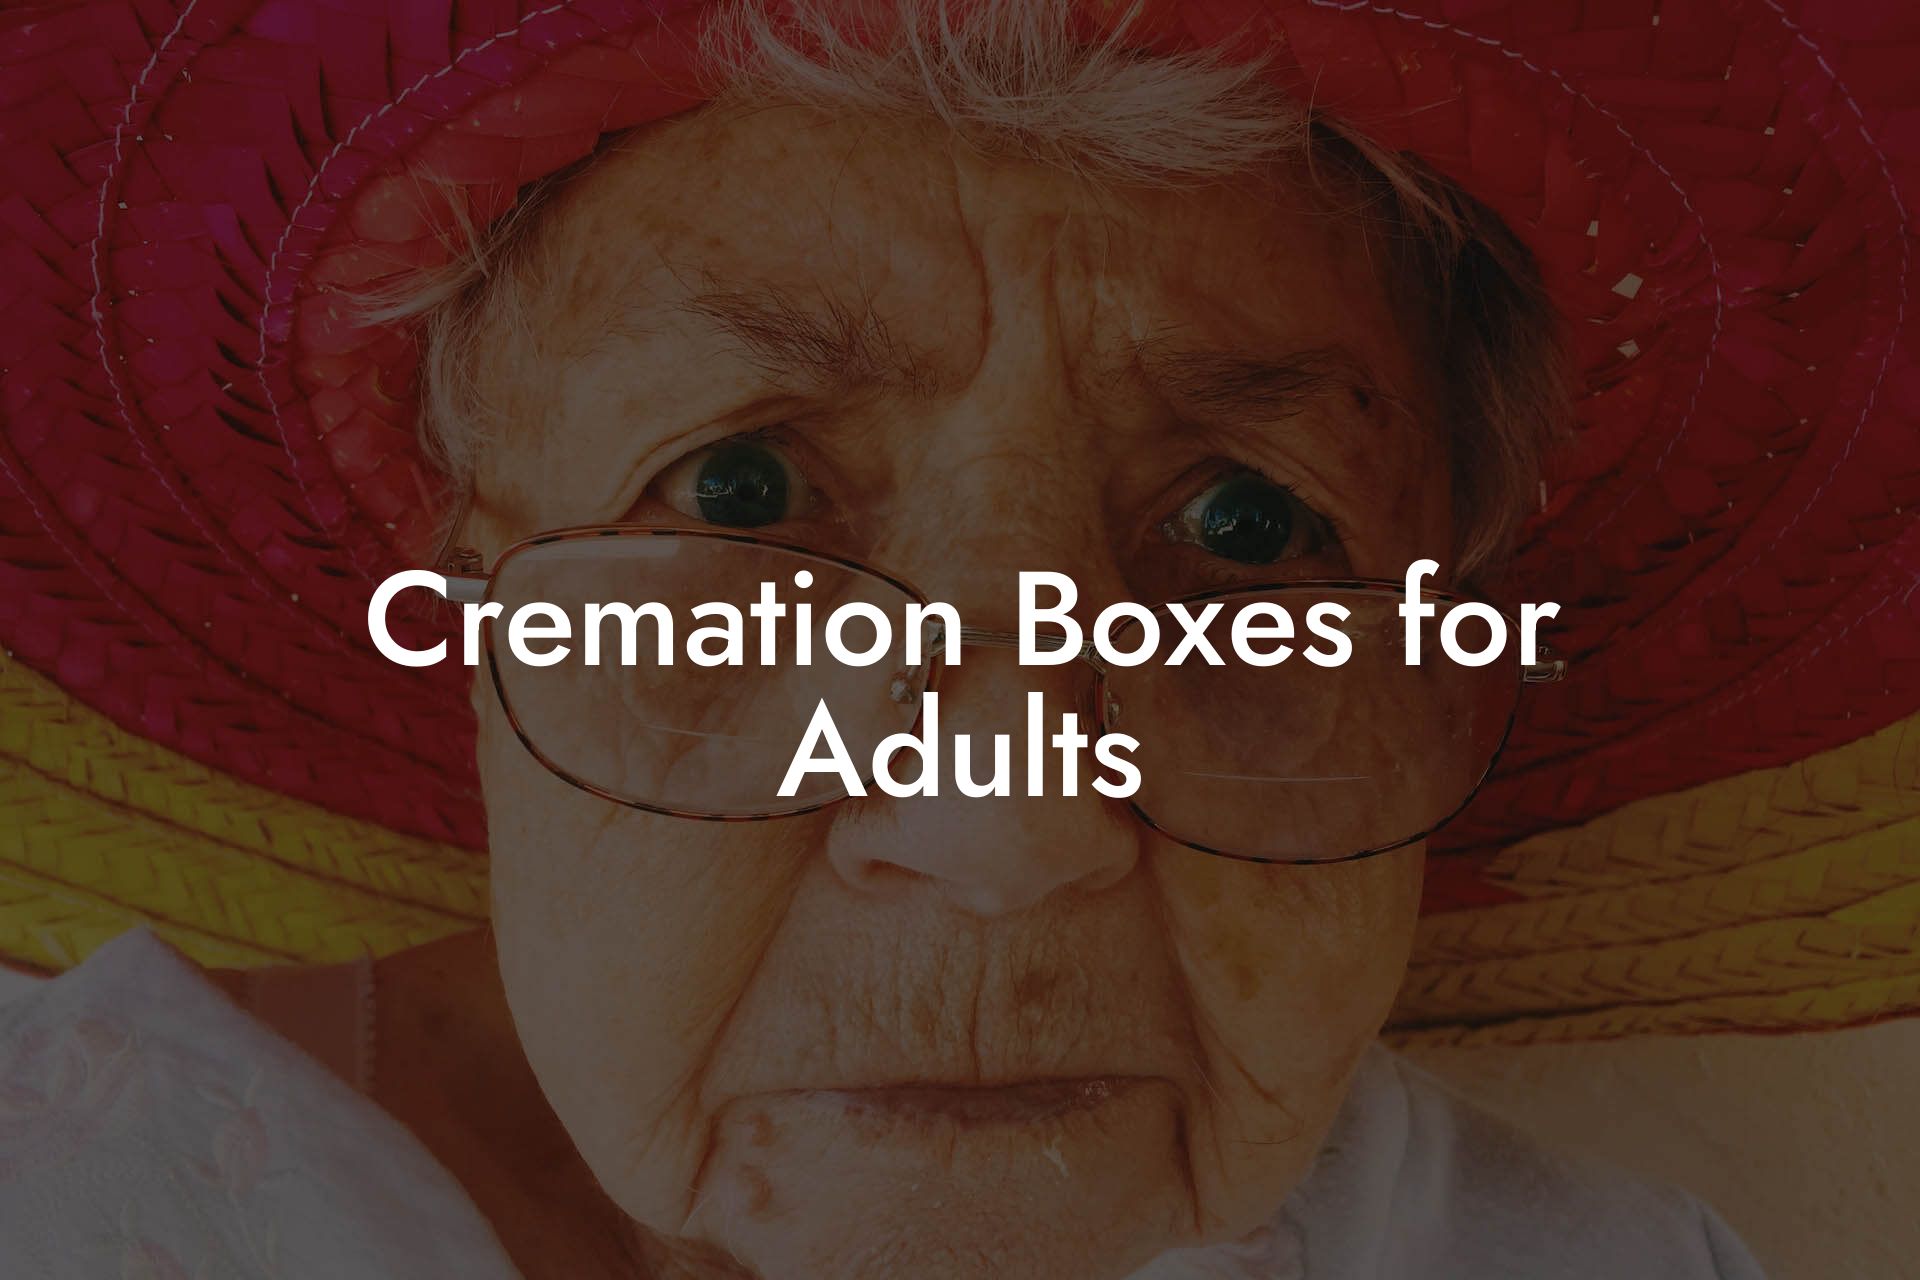 Cremation Boxes for Adults